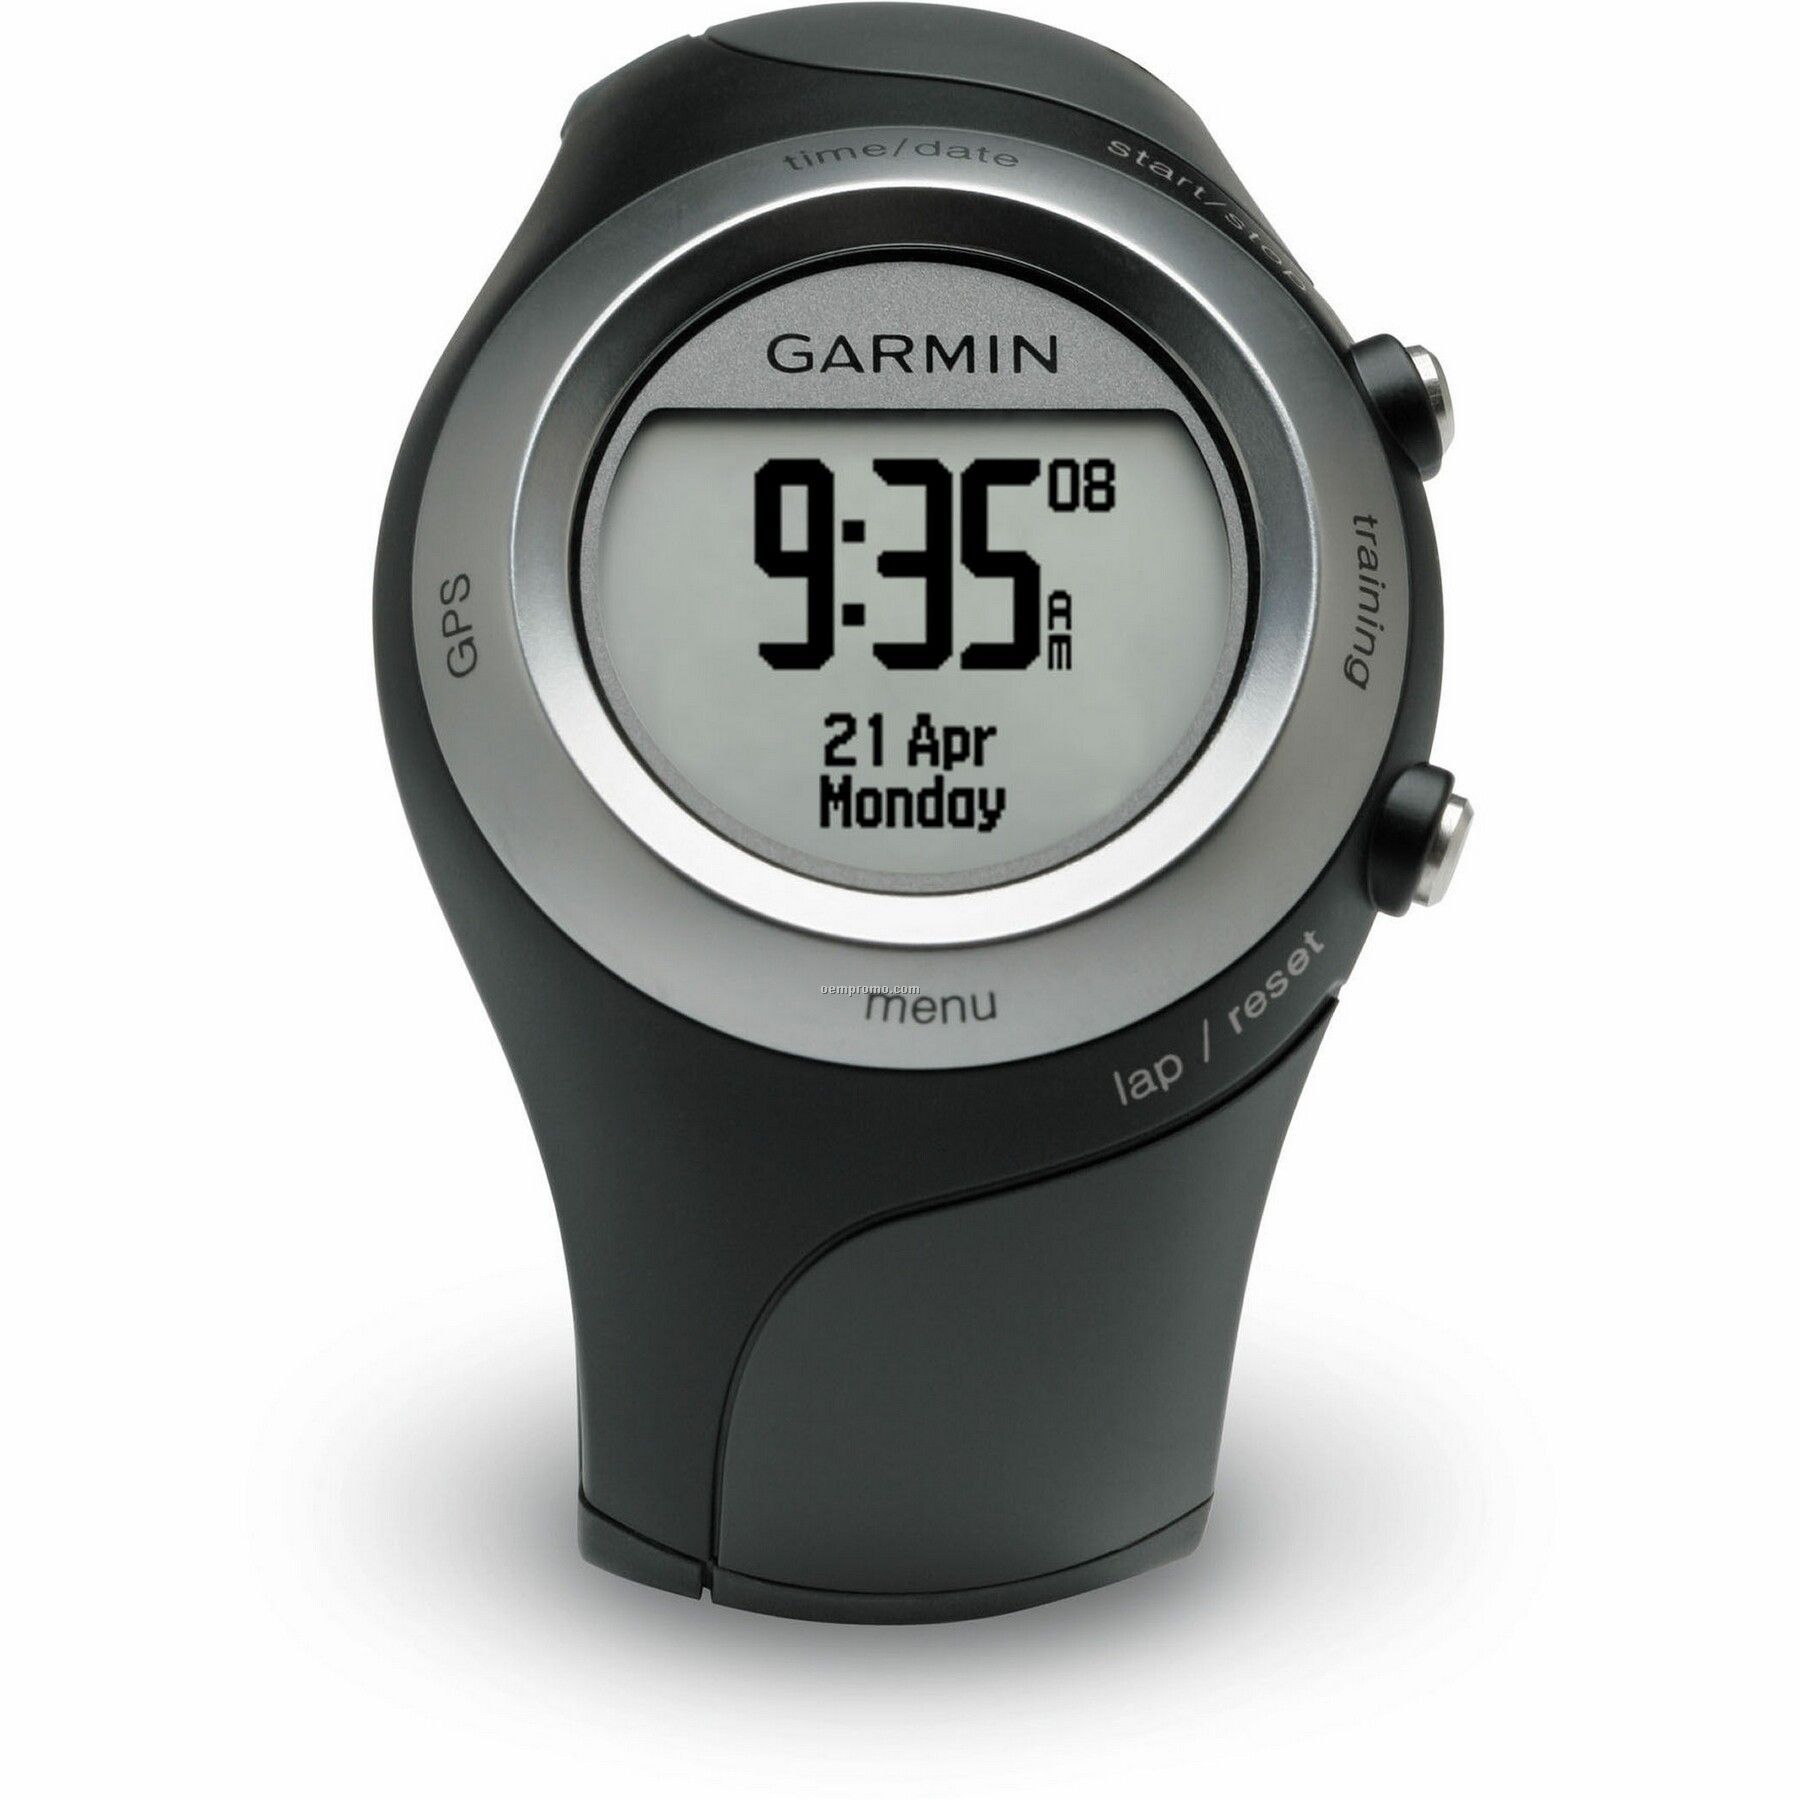 Garmin Forerunner405 Gps Fitness Watch With Heart Rate Monitor